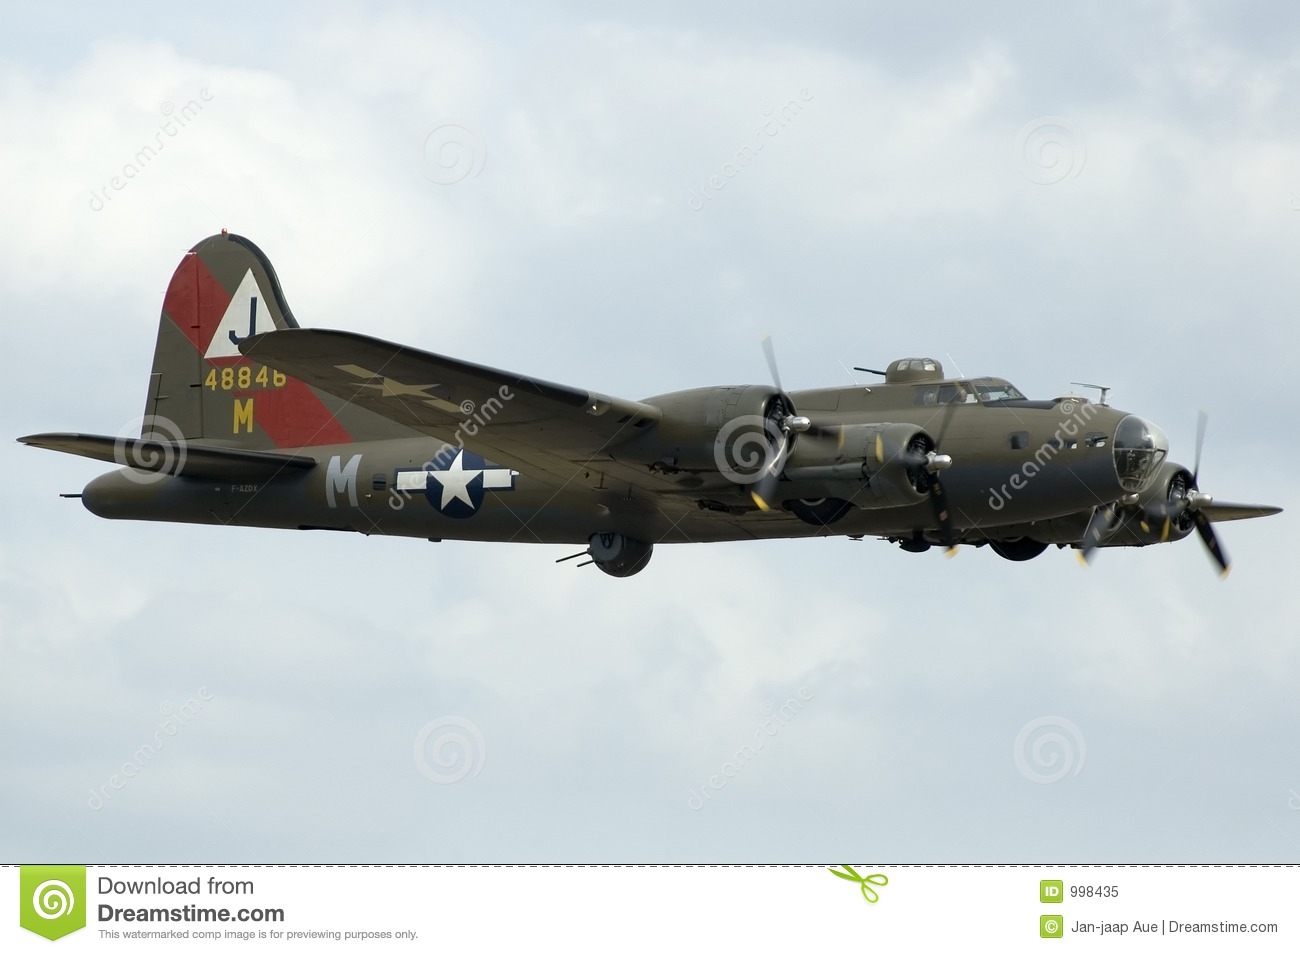 Nostalgic Wwii Airshow At Duxford Showing Flying Wwii B17 Bomber